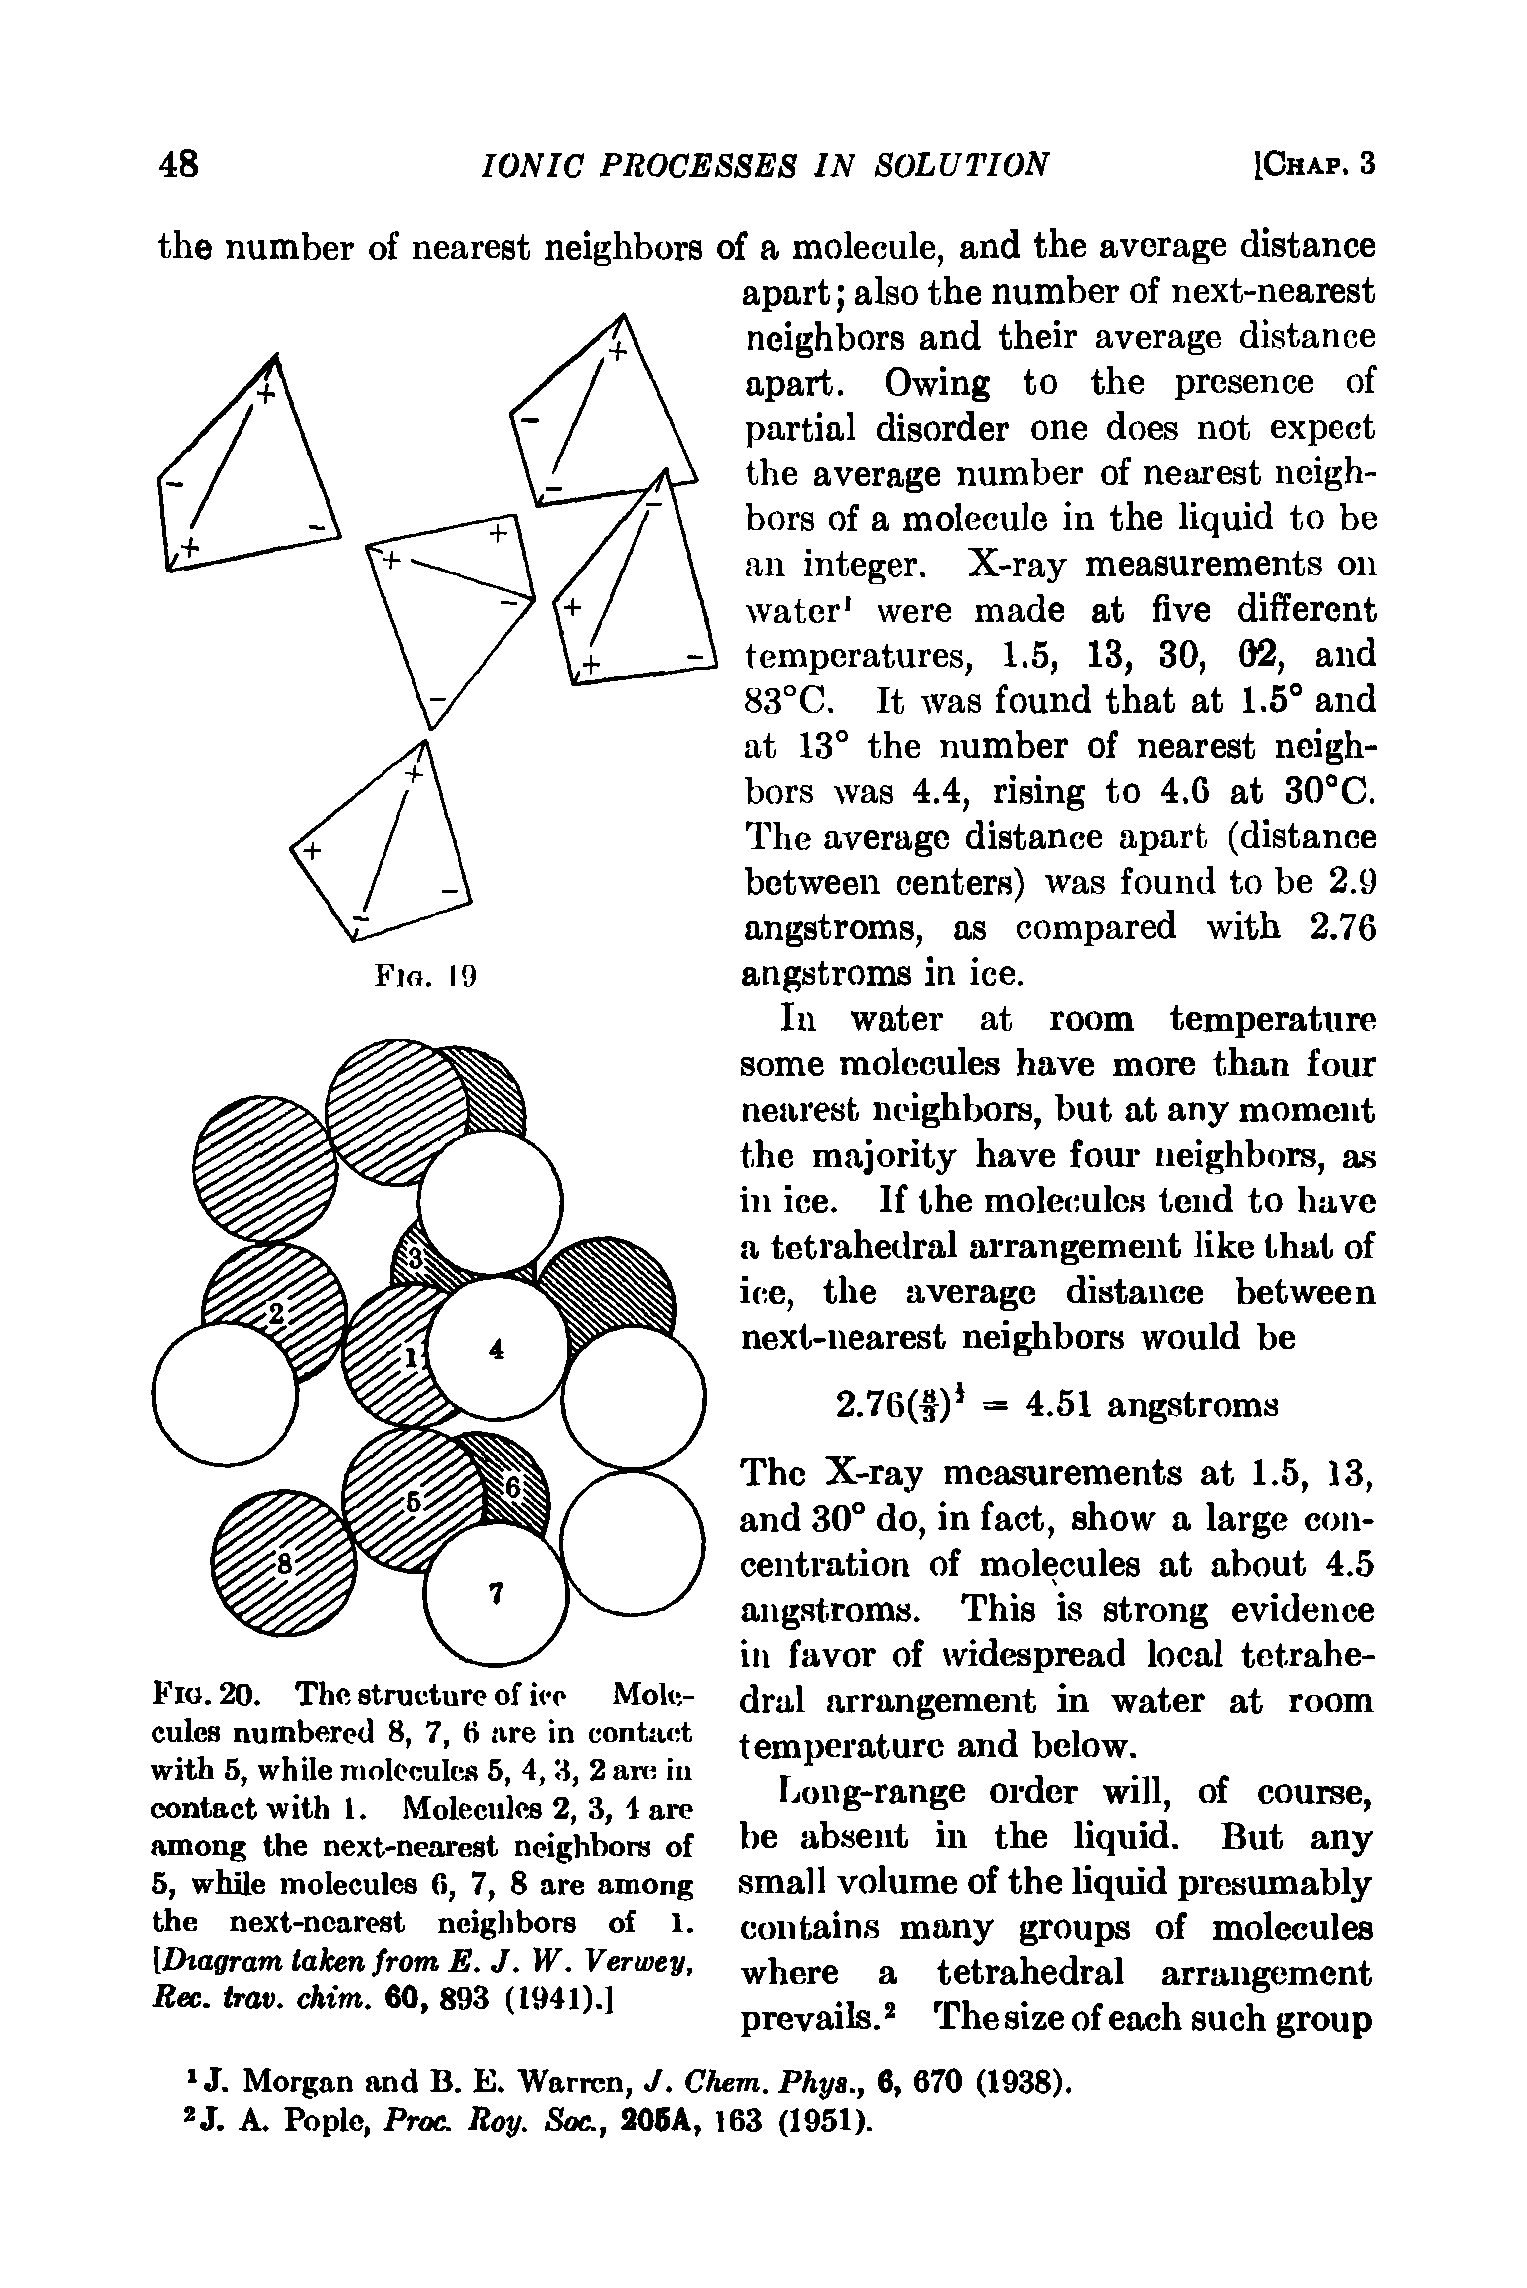 Fig. 20. The structure of ice Molecules numbered 8, 7, 6 are in contact with 5, while molecules 5, 4, 3, 2 arc in contact with 1. Molecules 2, 3, 4 are among the next-nearest neighbors of 5, while molecules 0, 7, 8 are among the next-nearest neighbors of 1. [Diagram taken from E. J. W. Verivey, Rec. trav. chim. 60, 893 (1941).]...